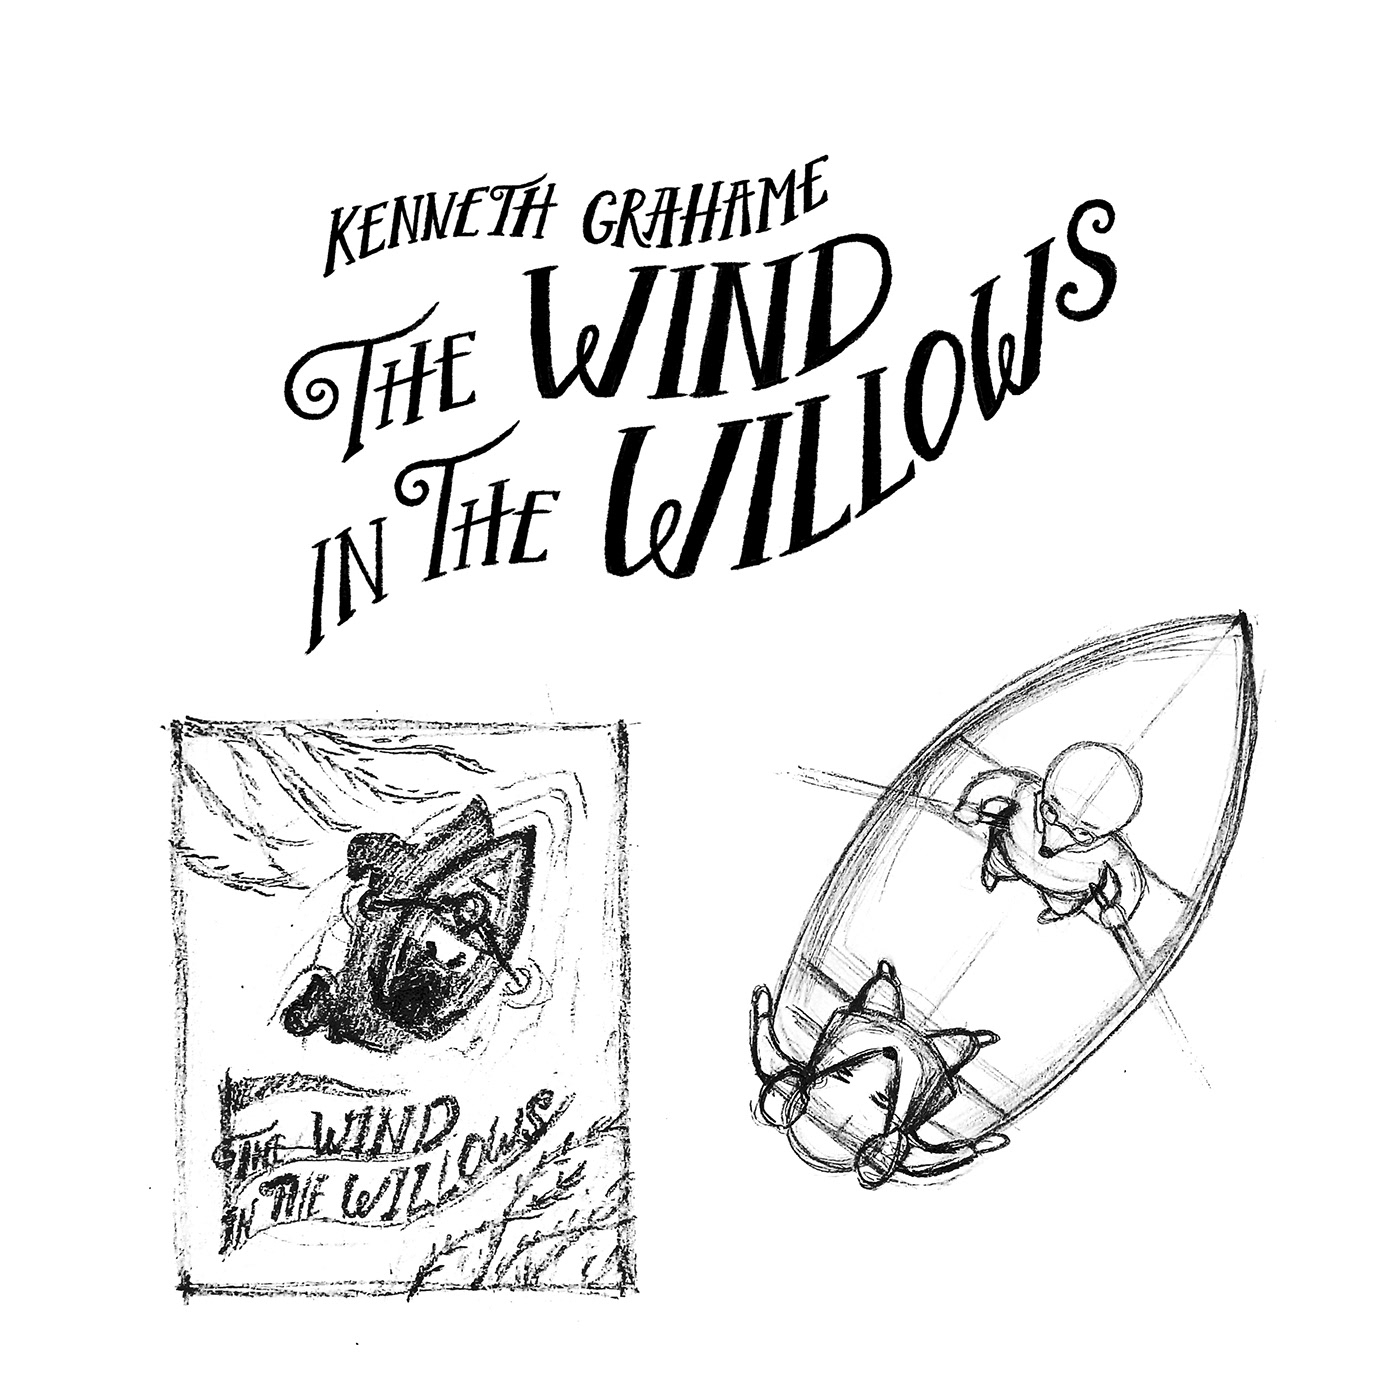 ILLUSTRATION  book cover book cover art book childrens book lettering иллюстрация graphic design  kenneth grahame  the wind in the willows